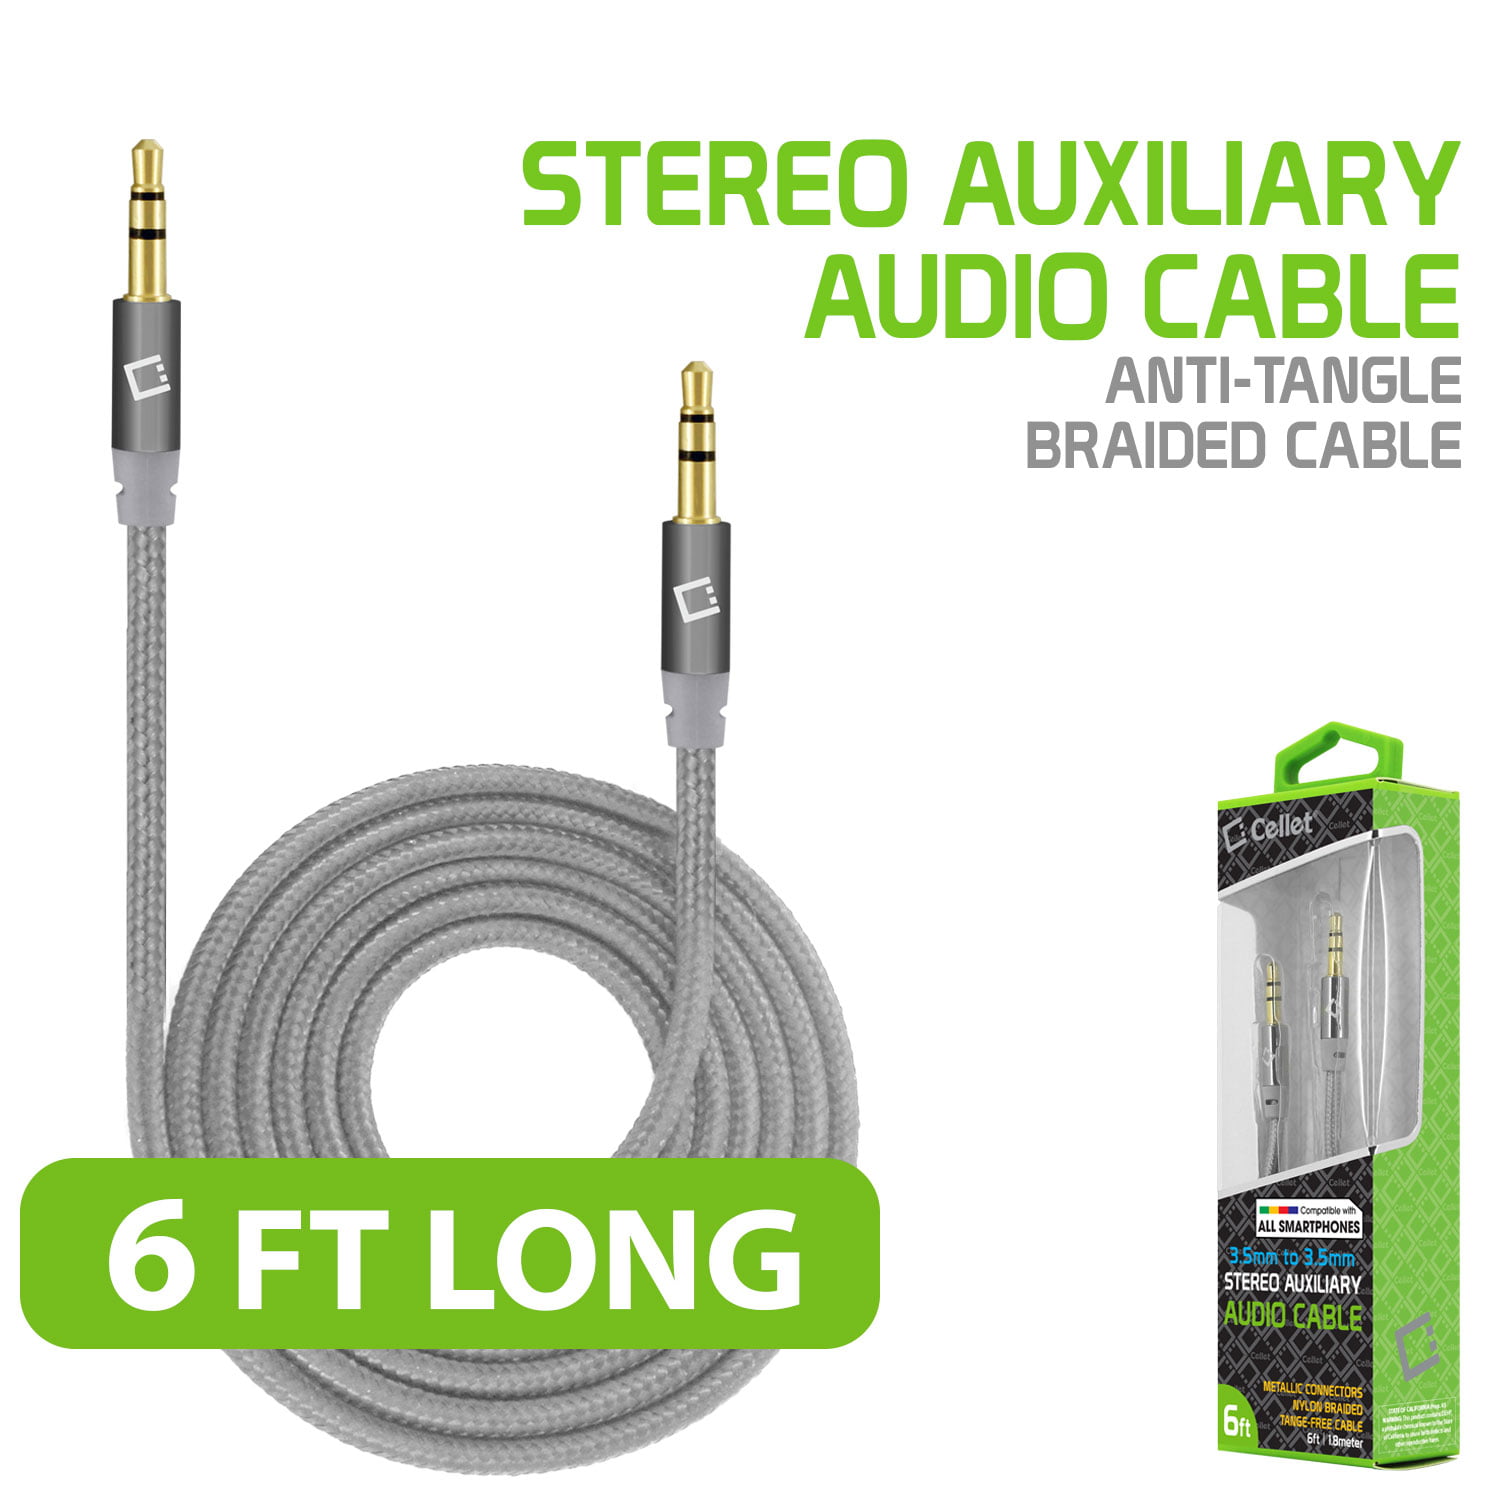 Tablets 90 Degree Right Angle Aux Cable - 24K Gold-Plated,Sound Quality EMK Audio Stereo Male to Male Cable for Laptop MP3 Players,Car/Home Aux Stereo Speaker or More 16Ft/5Meters